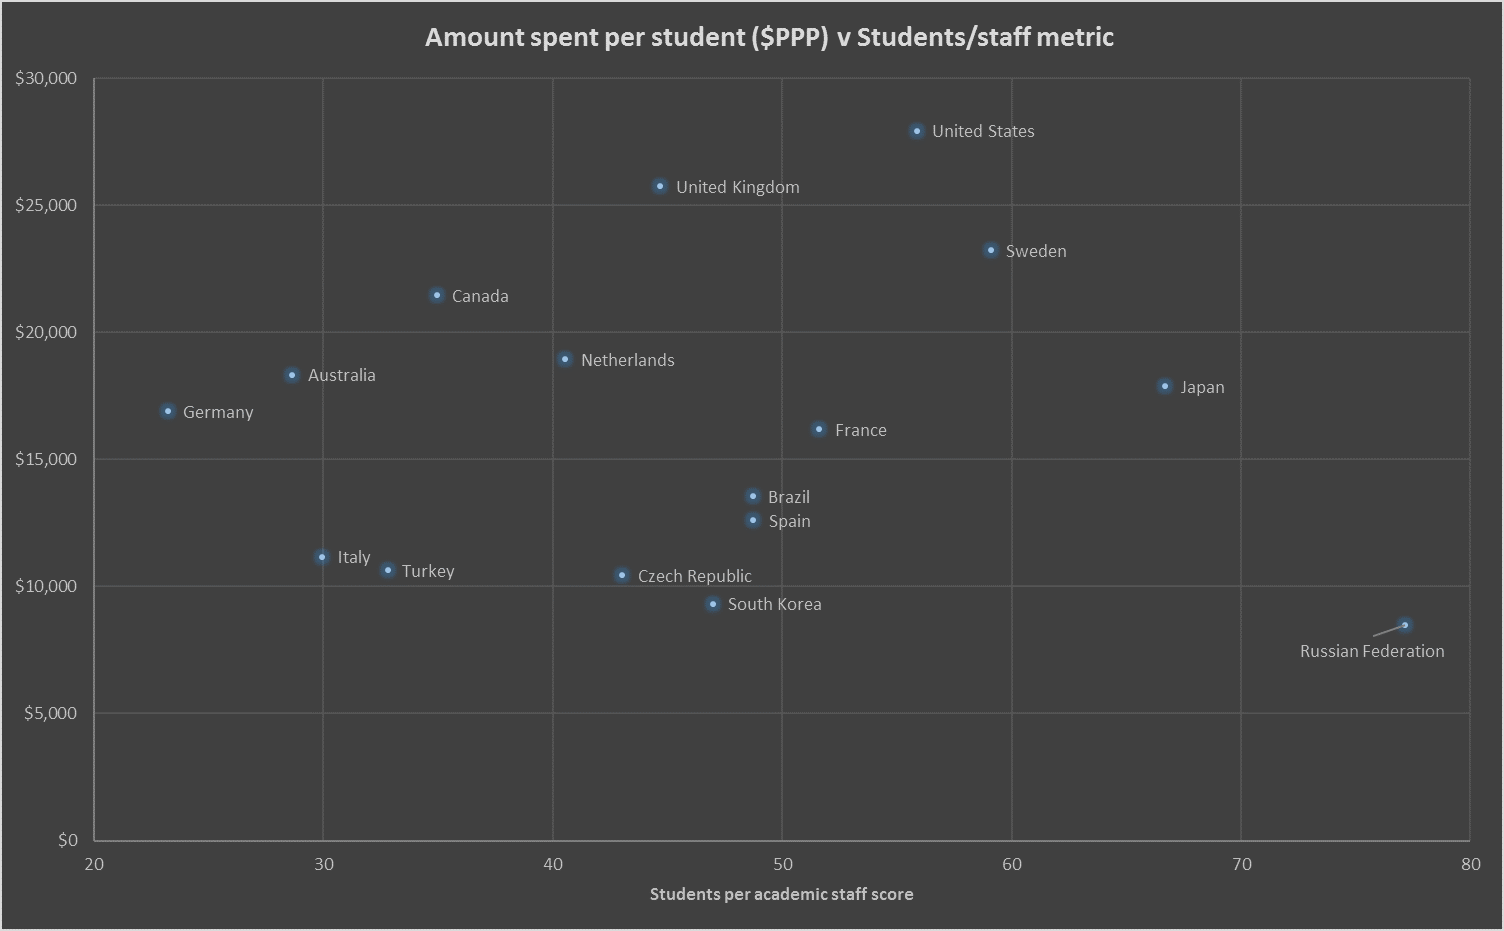 Staff-student ratio scores compared with spending per student